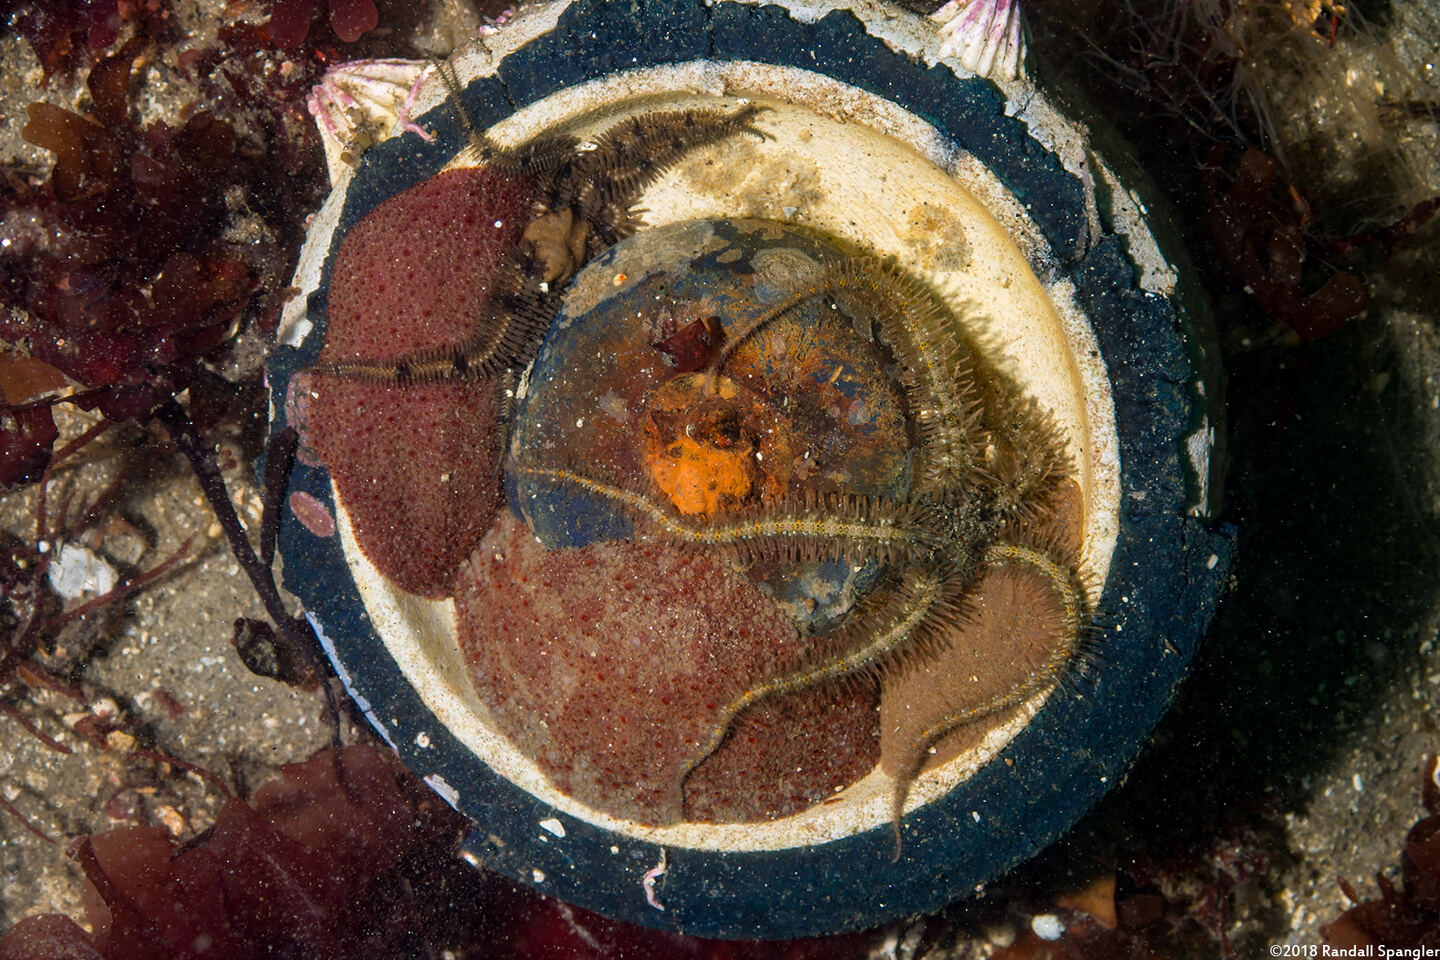 Cryptochiton stelleri (Gumboot Chiton); Small ones hiding in a shopping wheel